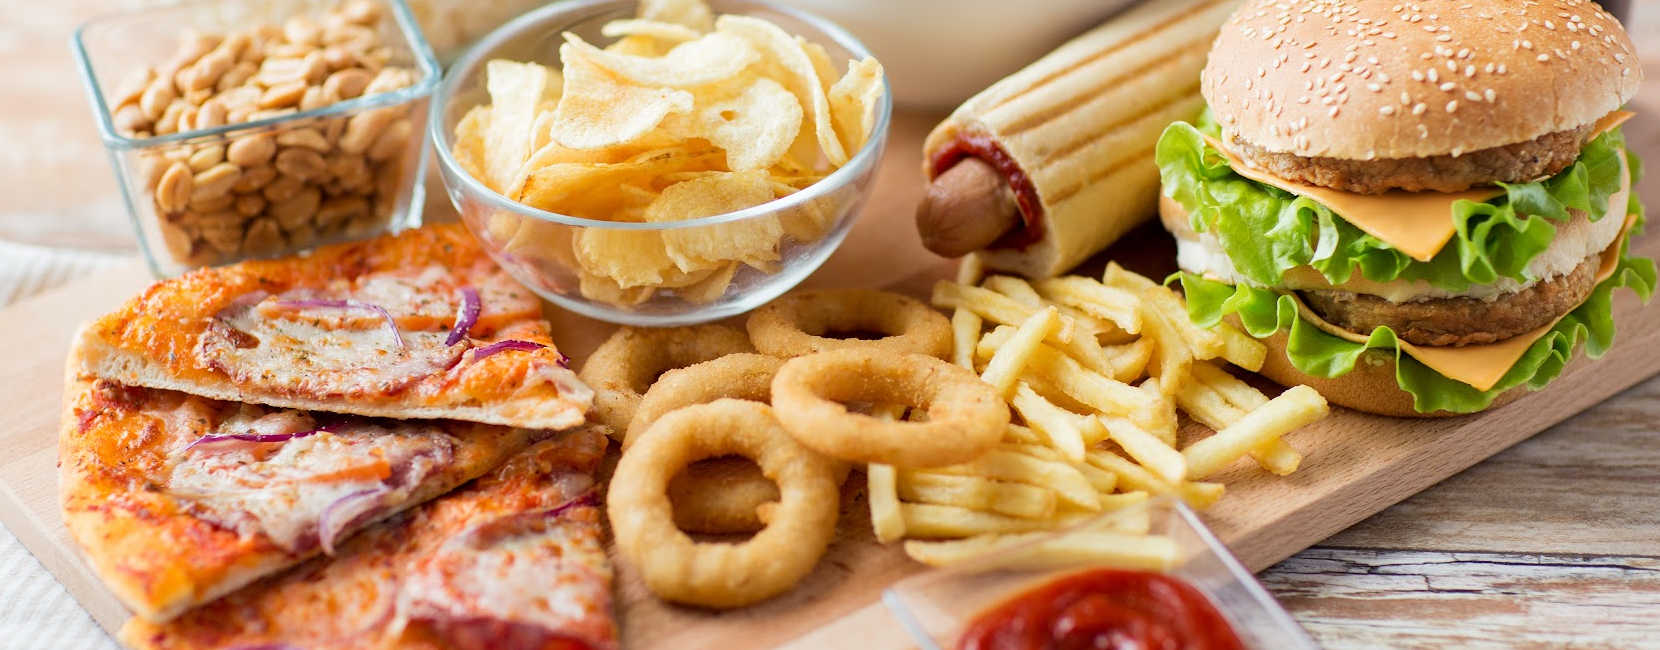 A bunch of fast foods on the table including pizza, burgers, hot dogs, and fries.